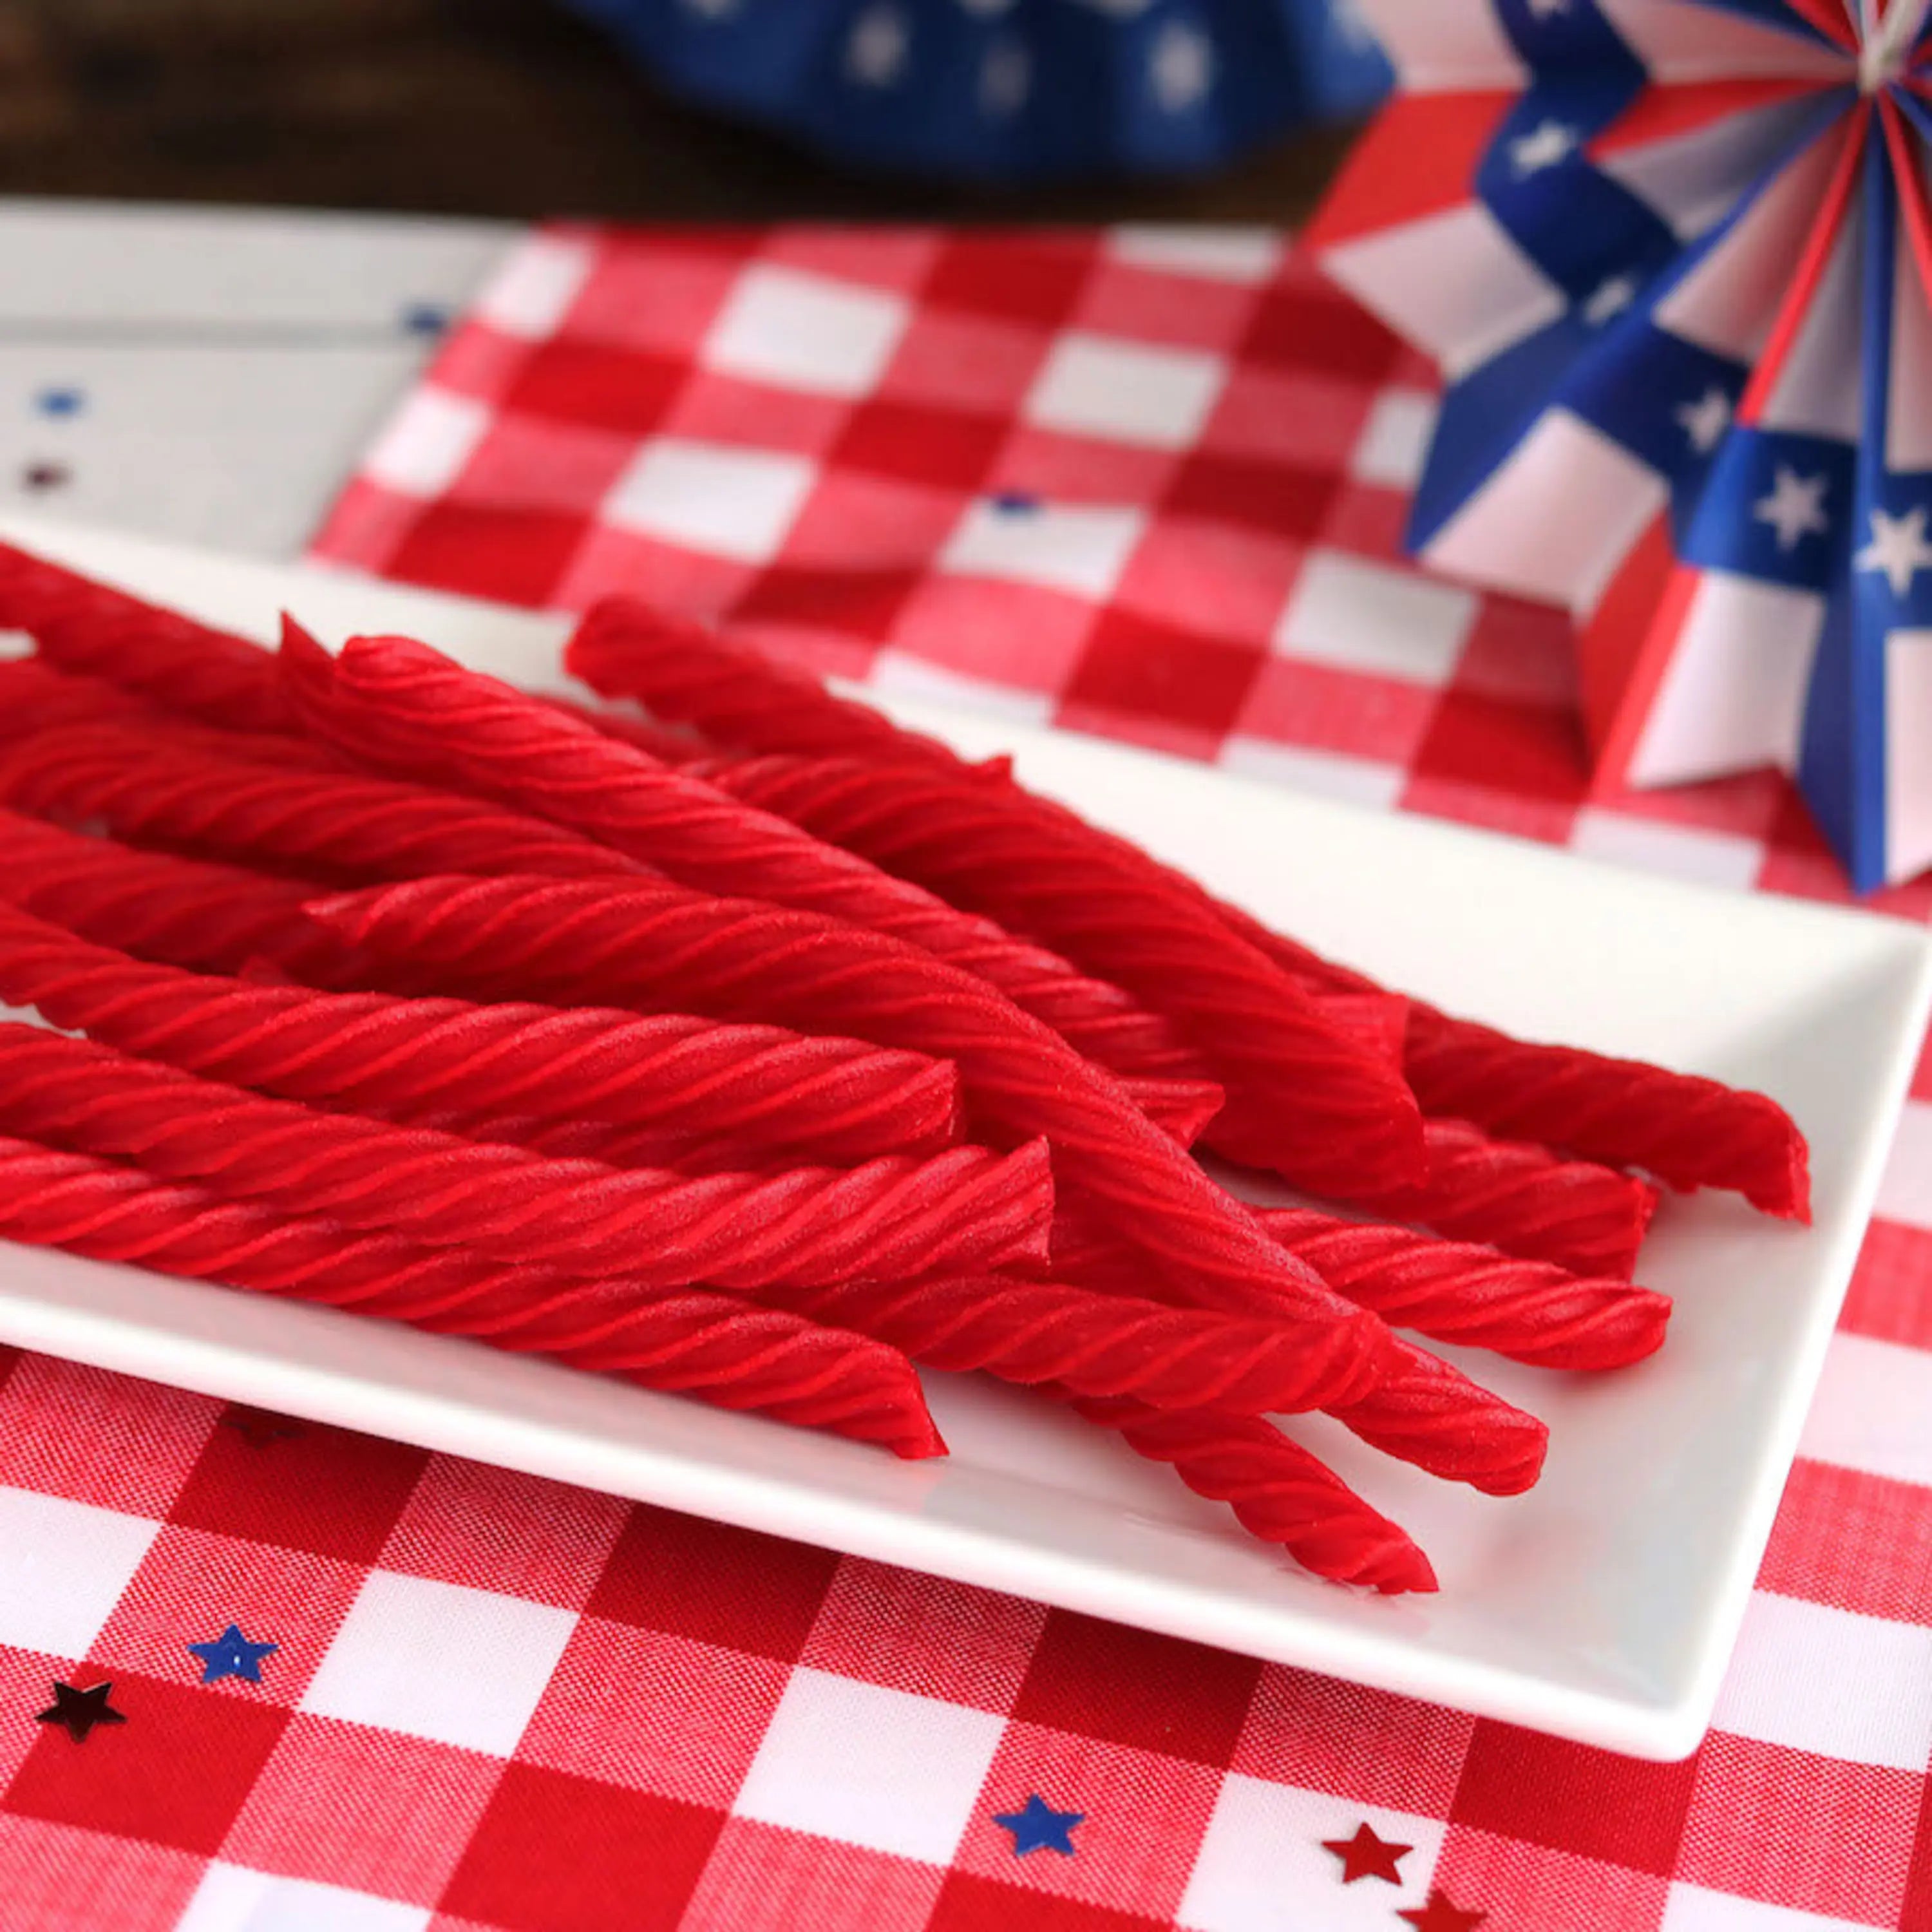 Red Vines Original Red Licorice Twists on a picnic table with patriotic decorations